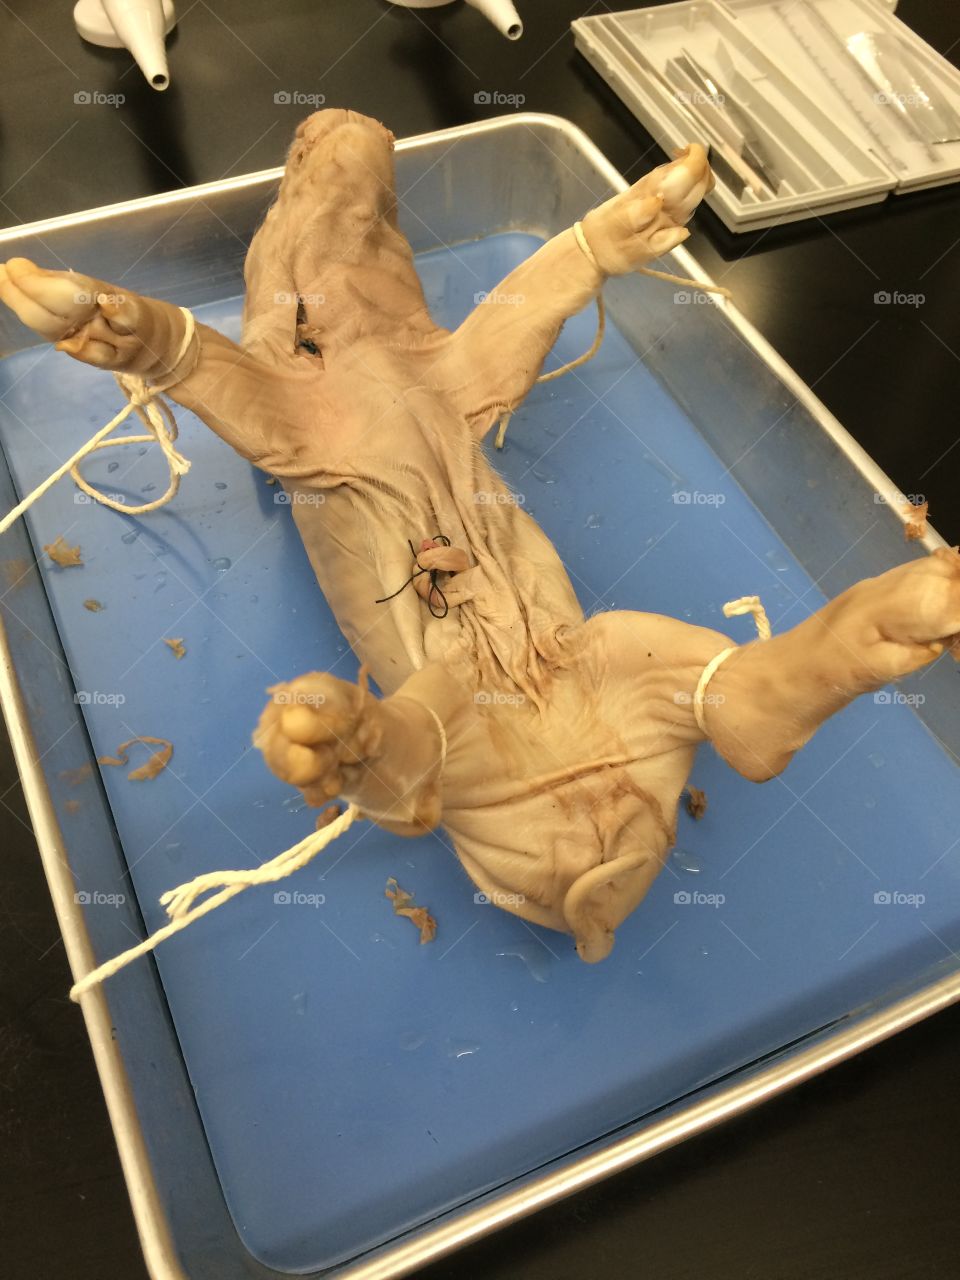 We dissected a feral pig 